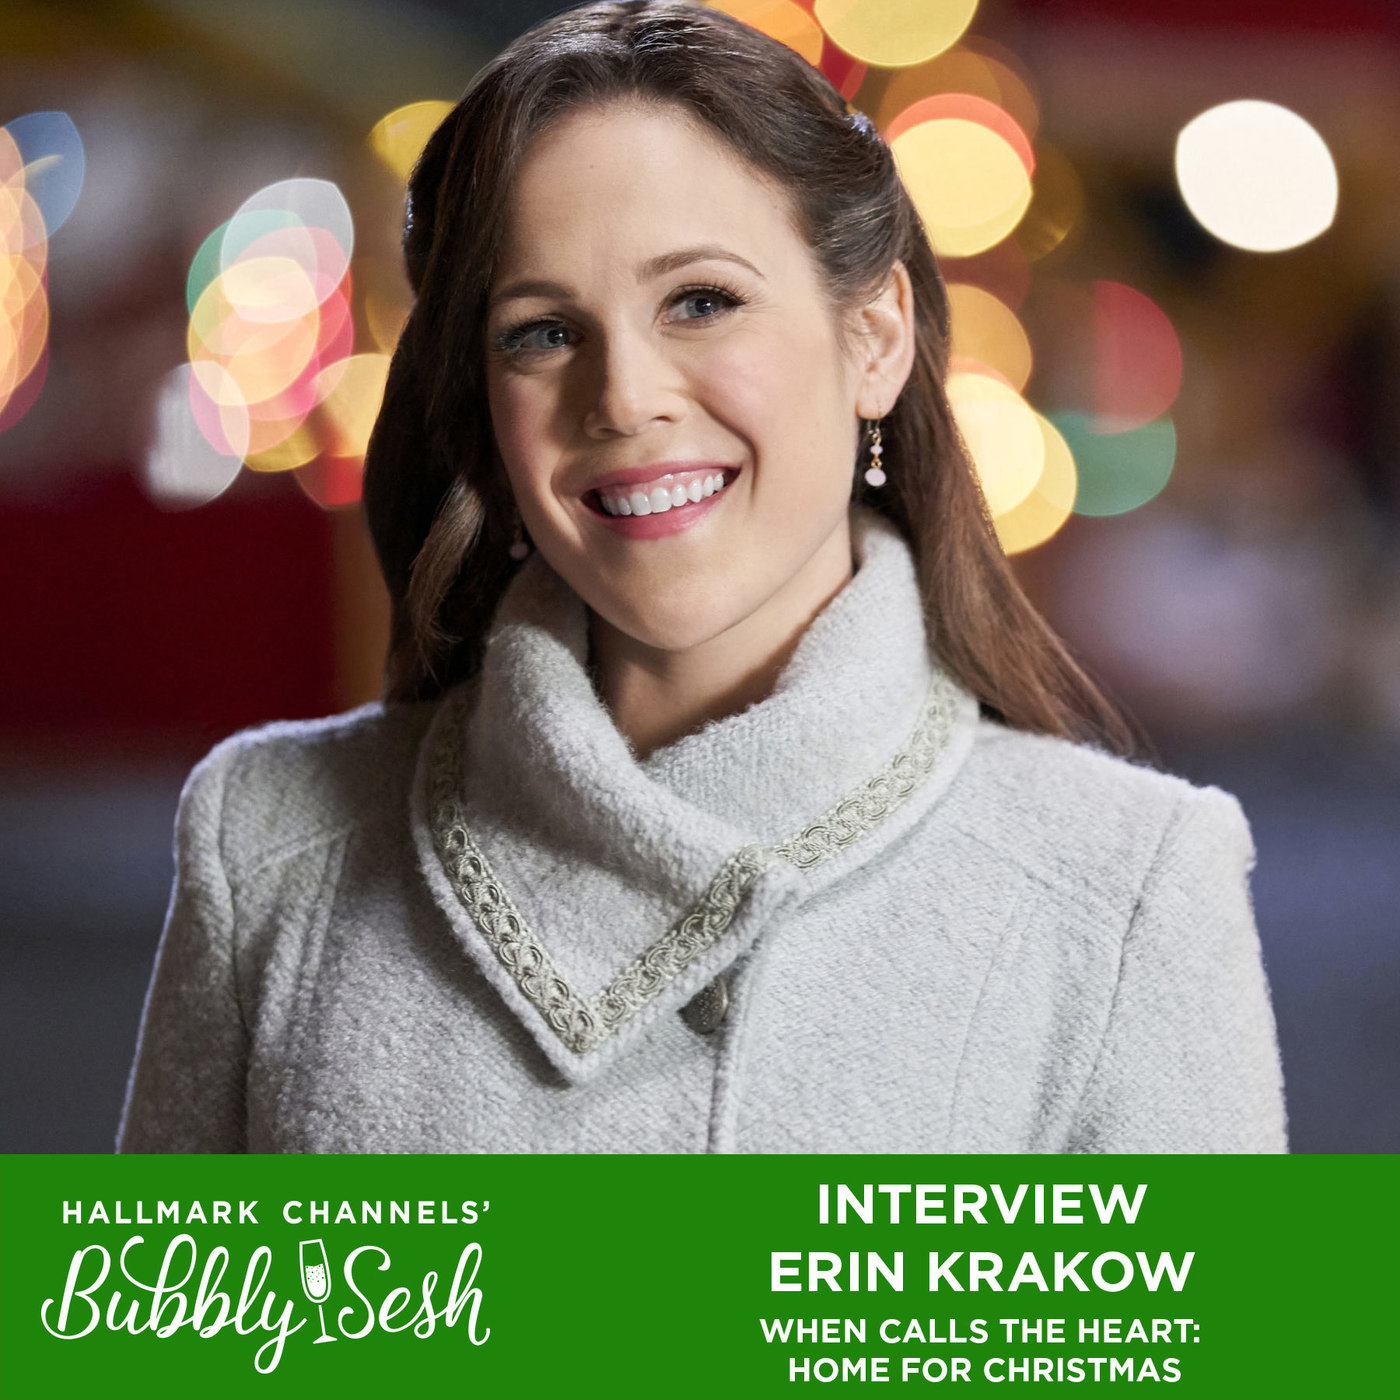 Erin Krakow Interview When Calls the Heart: Home for Christmas